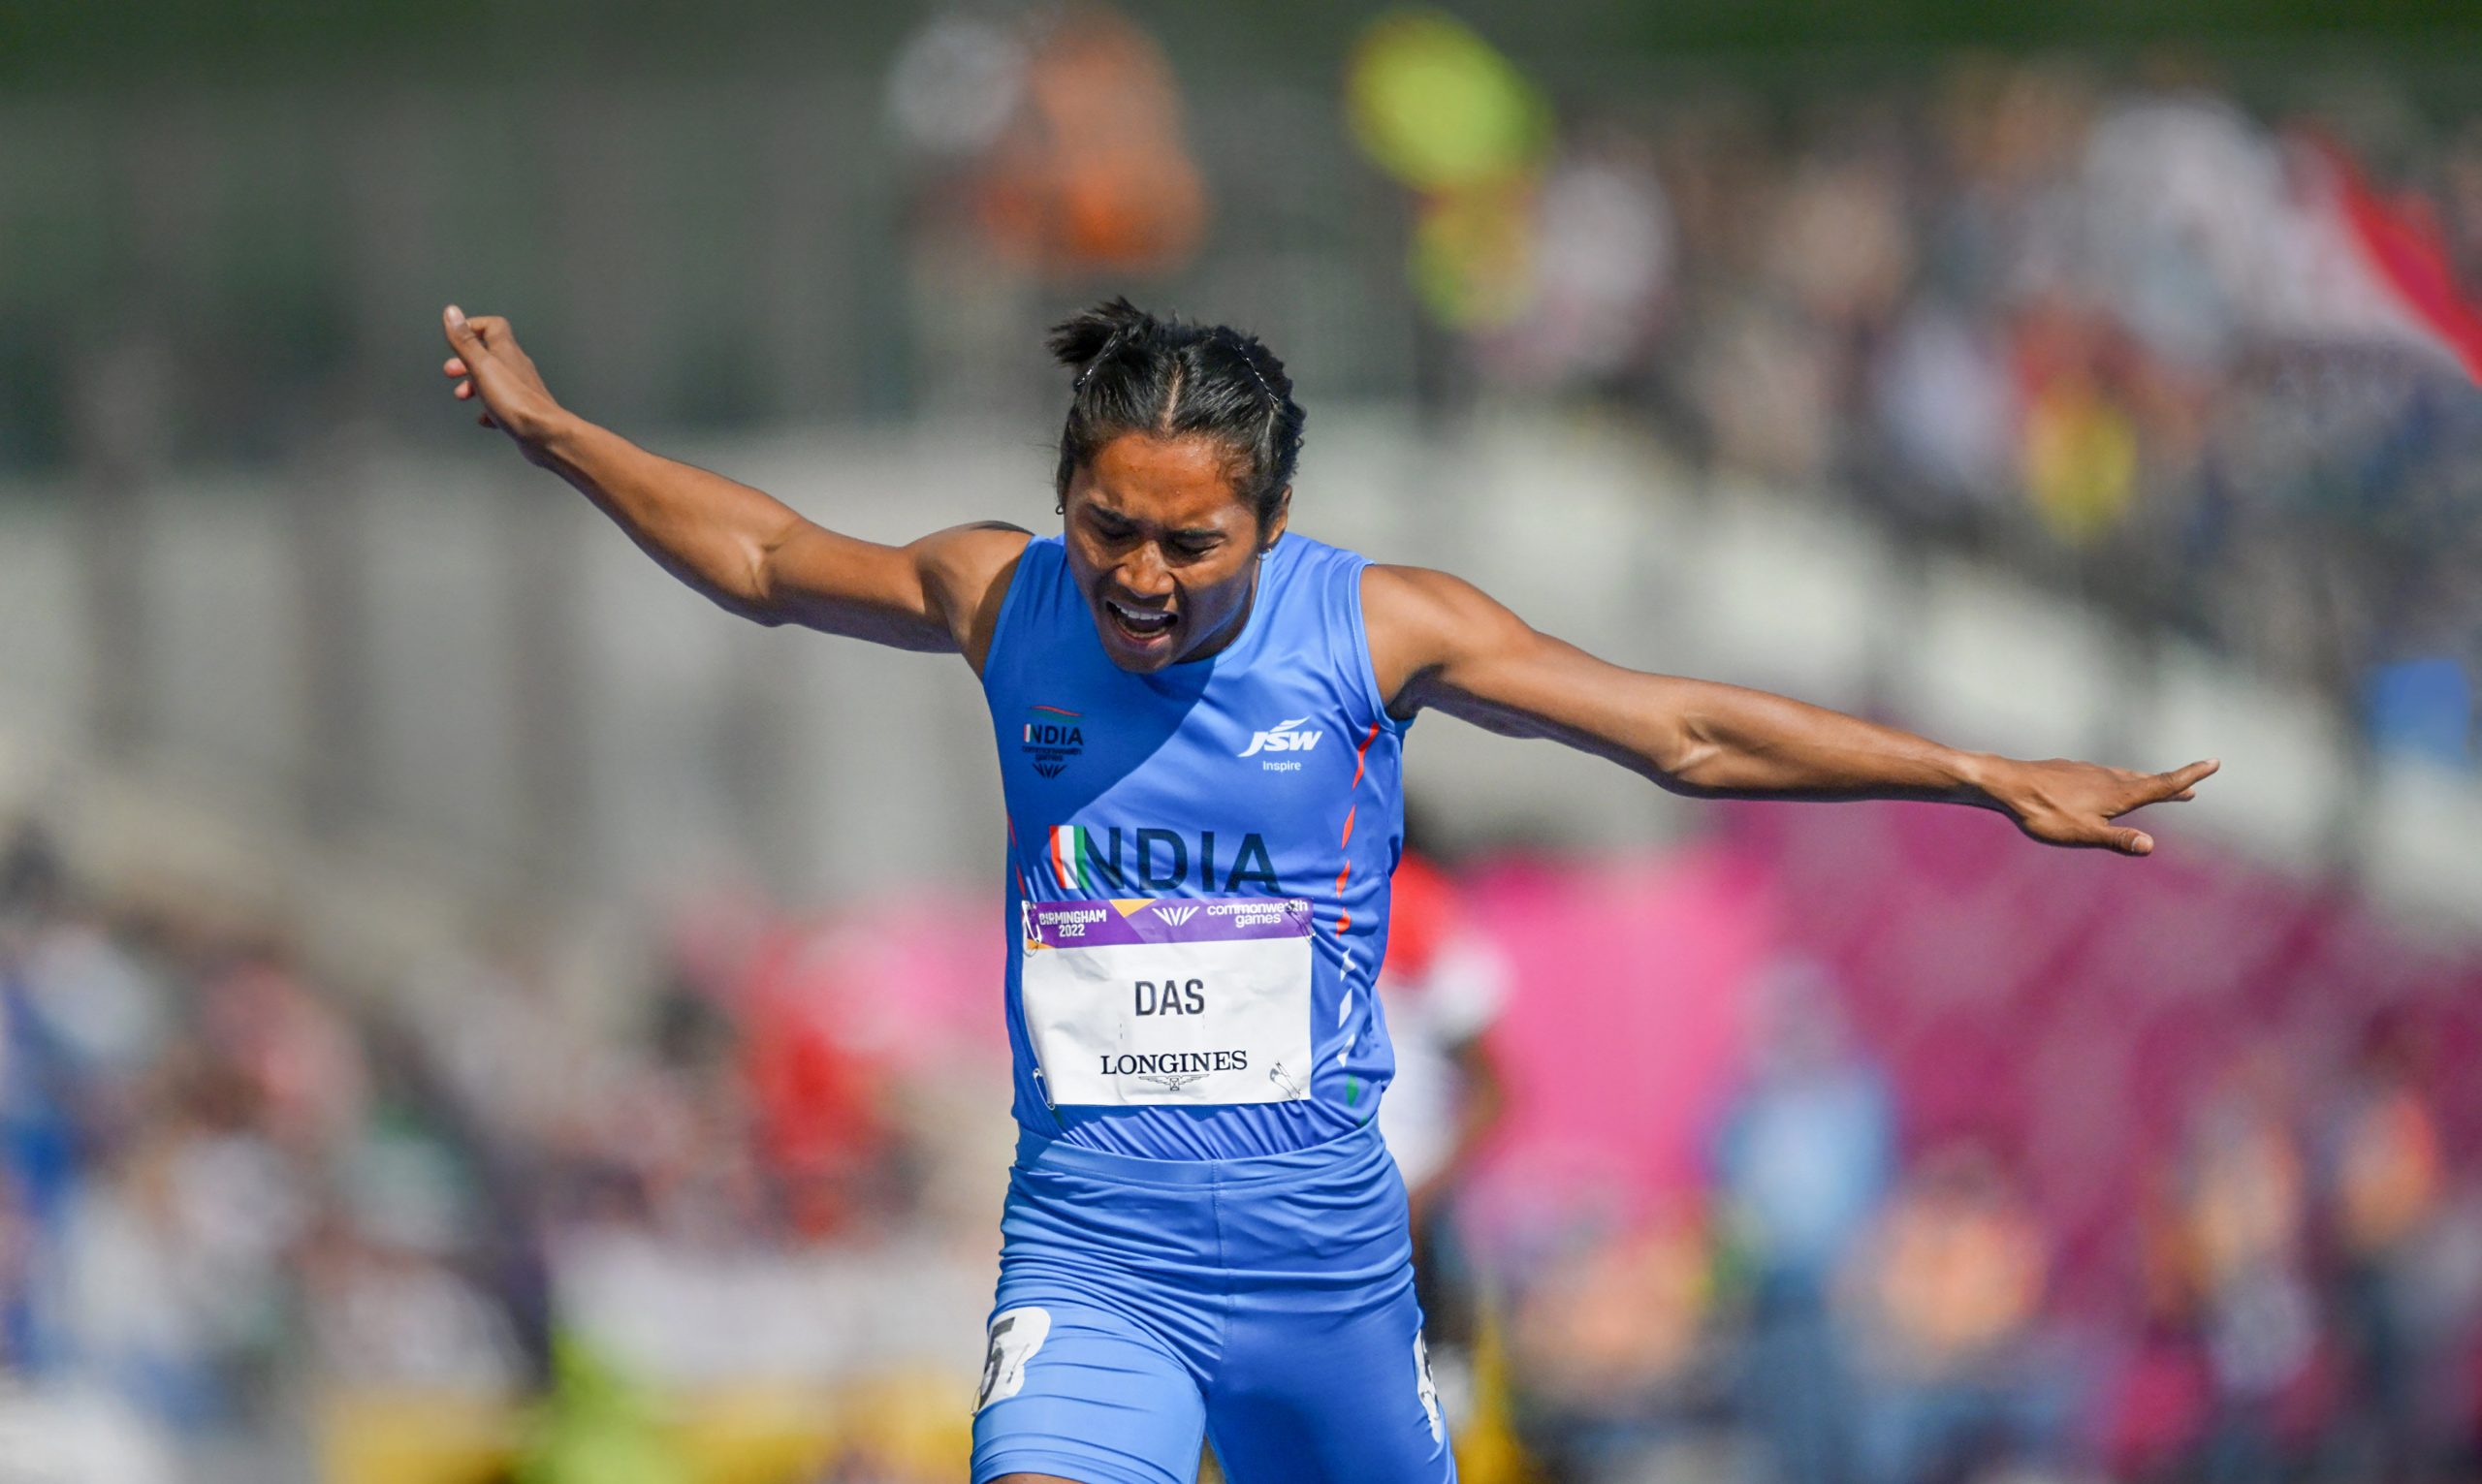 Watch: Hima Das qualifies for women’s 200m sprint semifinals at CWG 2022